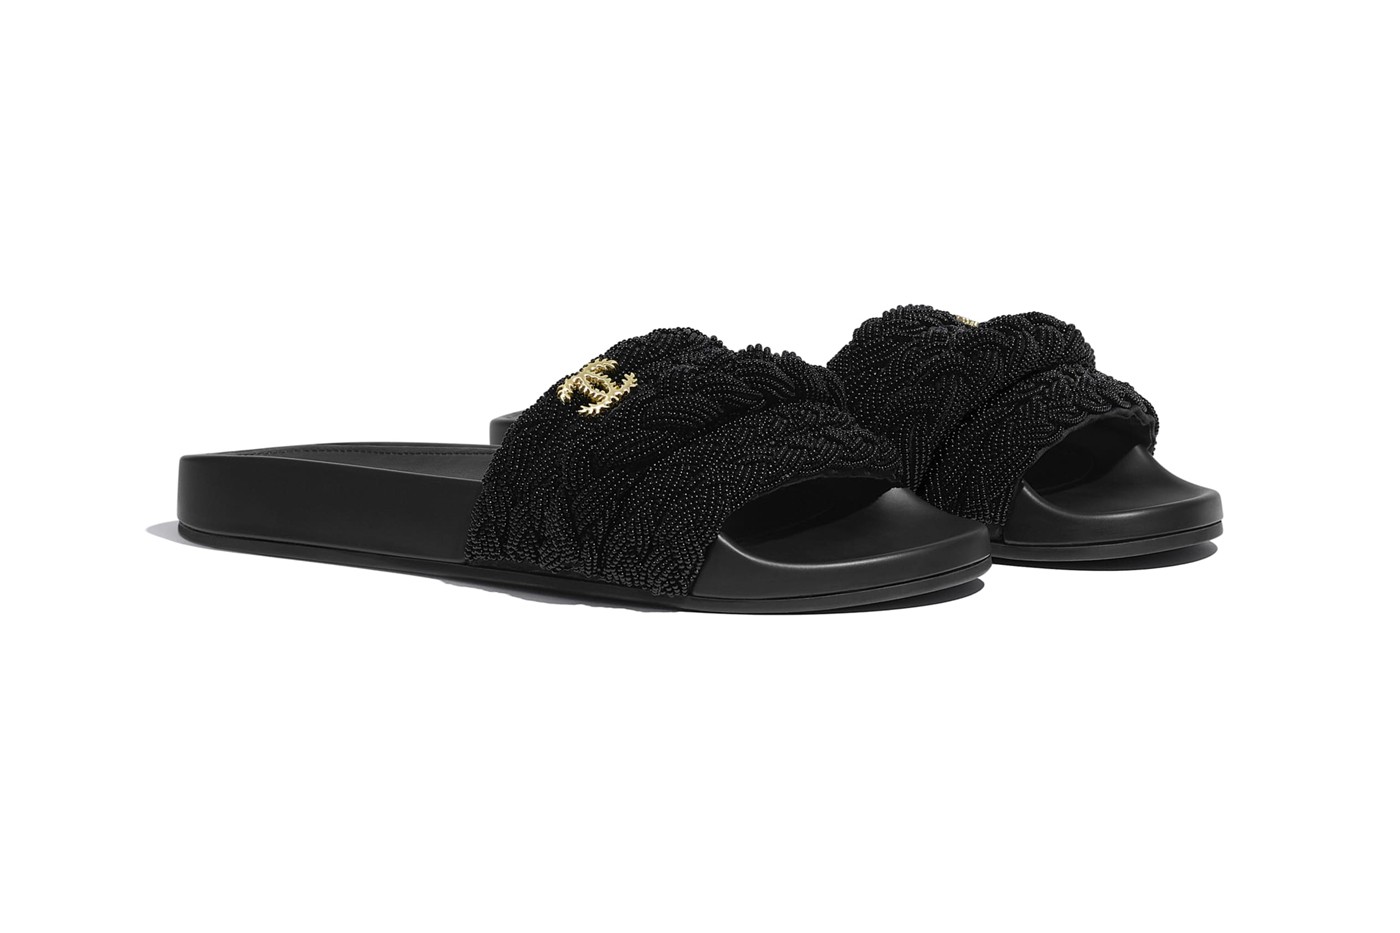 Chanel Blacked Out Luxurious Slides